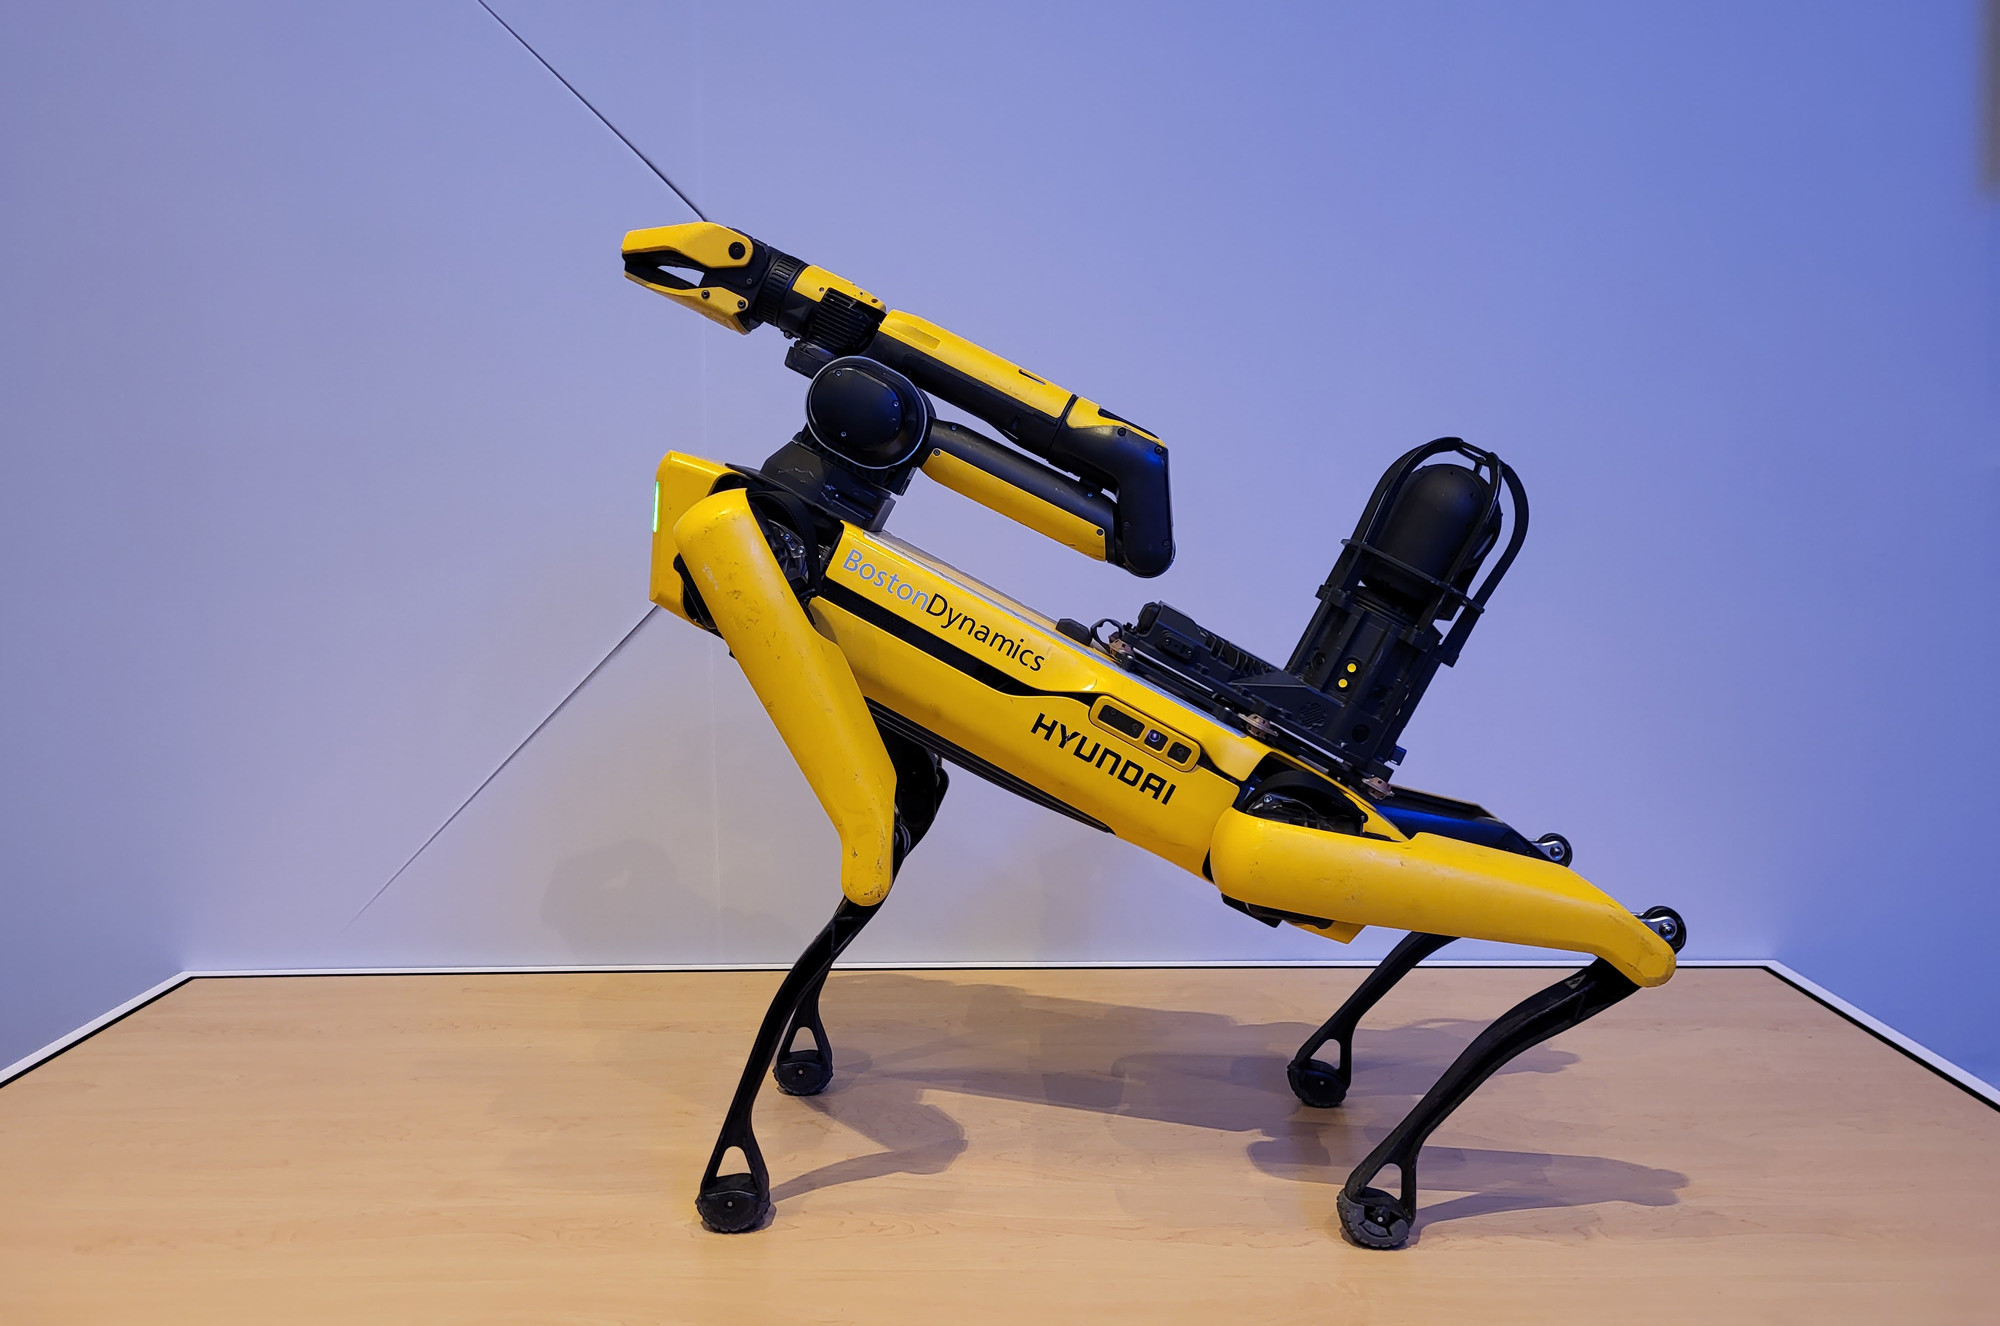 A close up of the Boston Dynamics robot